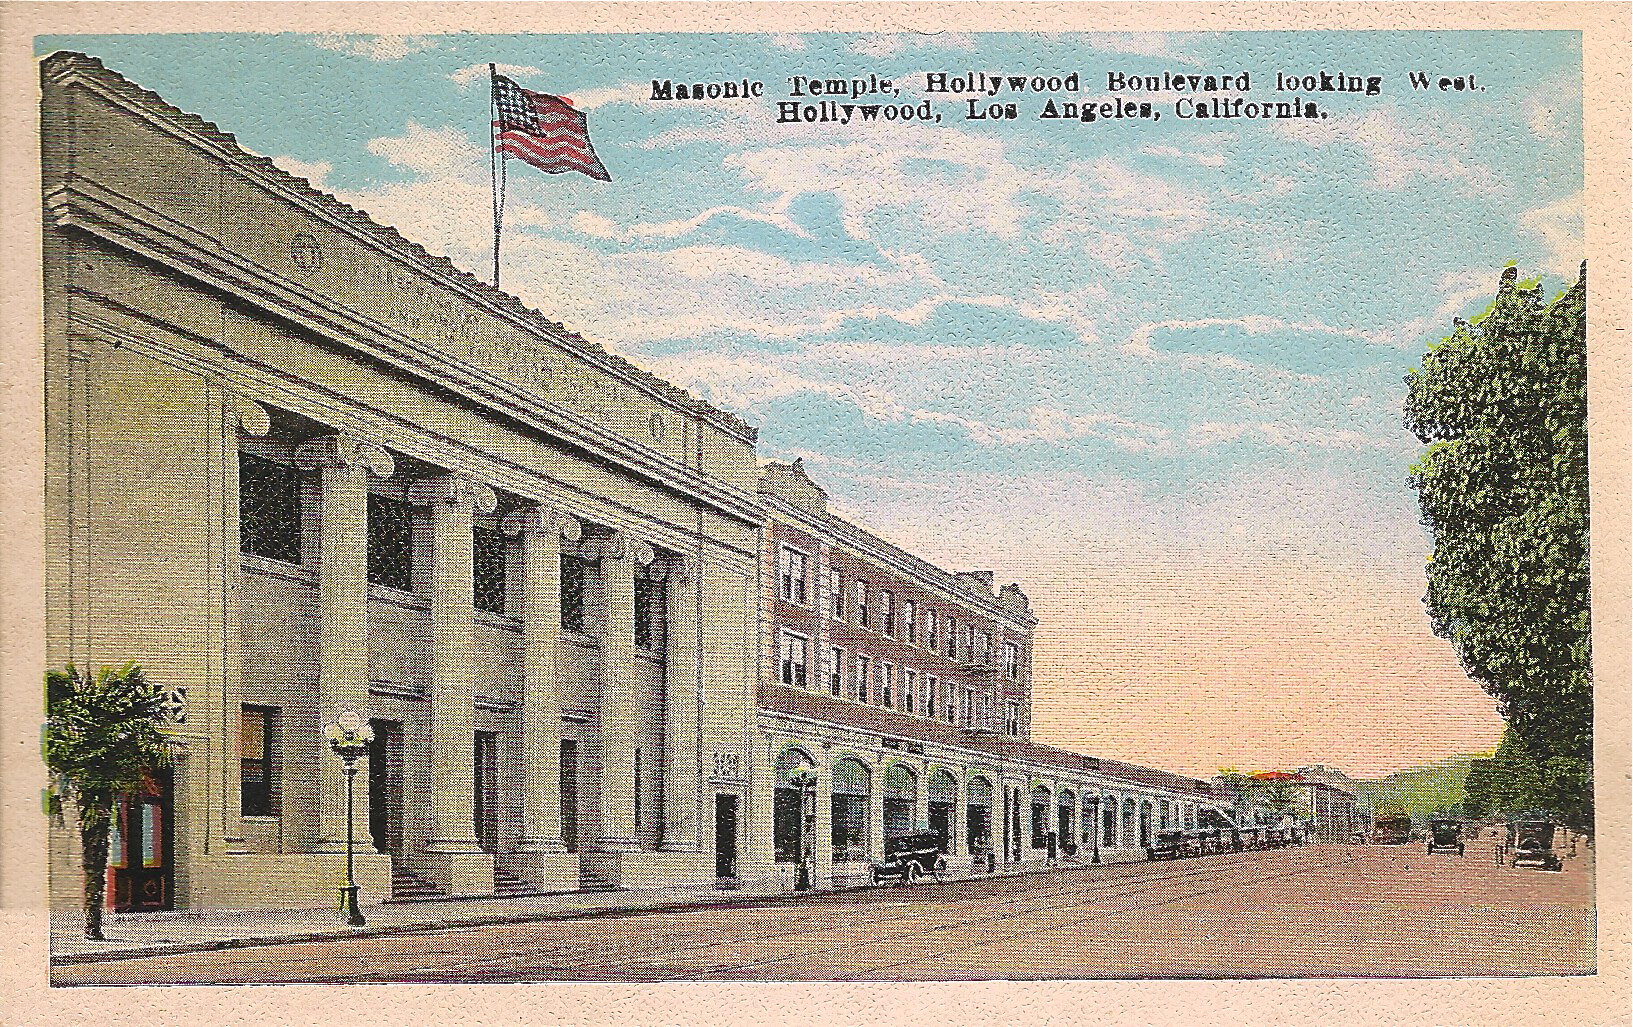 The old Masonic Temple on Hollywood Boulevard, looking west